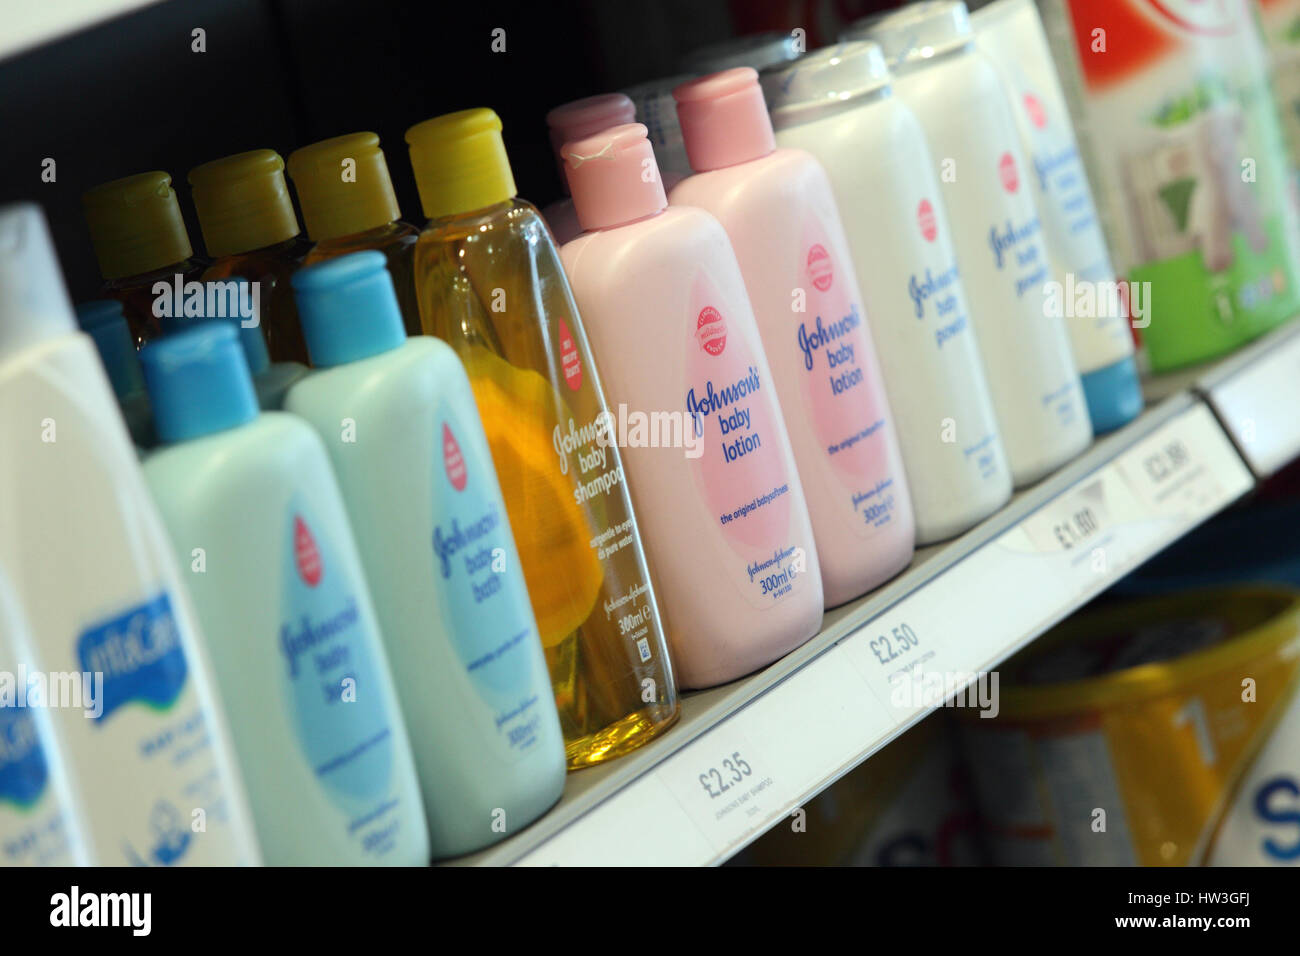 Johnsons baby products on the shelves of a pharmacy shop. Stock Photo